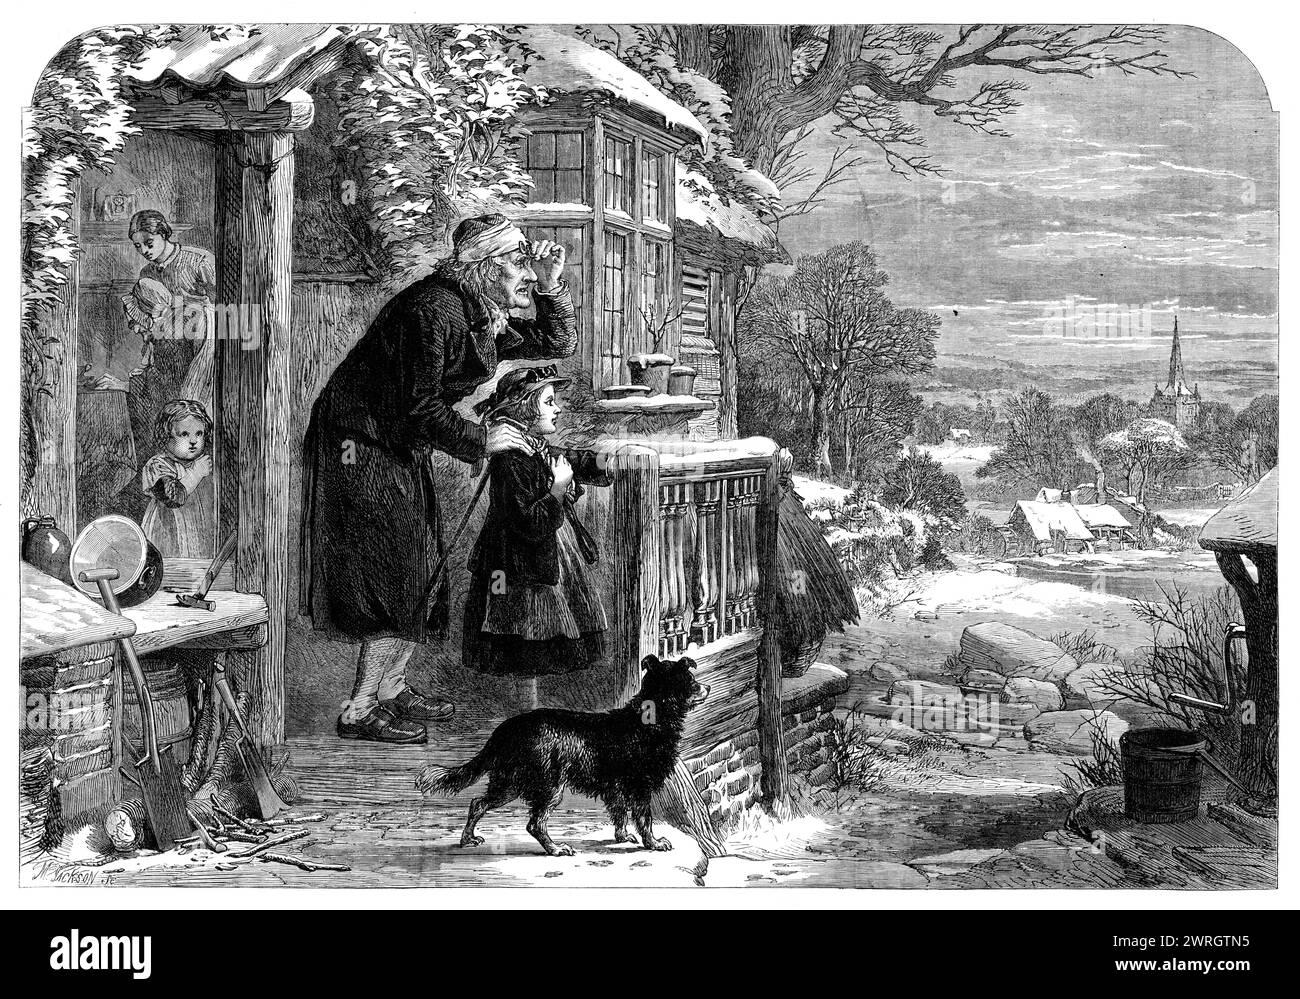 &quot;Winter&quot;, drawn by A. Hunt, 1864. 'The sun is sinking-in the wintry sky, And all the landscape lies enwrapp'd in snow; The day is dying, and to see it die Come youth and age, who watch the fading glow. Age looks forth wistfully, and longs to go Thus gently, silently, to peaceful rest: Youth, full of hope, unconscious of life's woe, Gazes in gladness on the glowing west. Old age is weary - he has played his part - Life's wintry day is drawing to its close; But spring is shining in the child's young heart, Like dewdrops gleaming on the budding rose. The night is coming; but the morn is Stock Photo